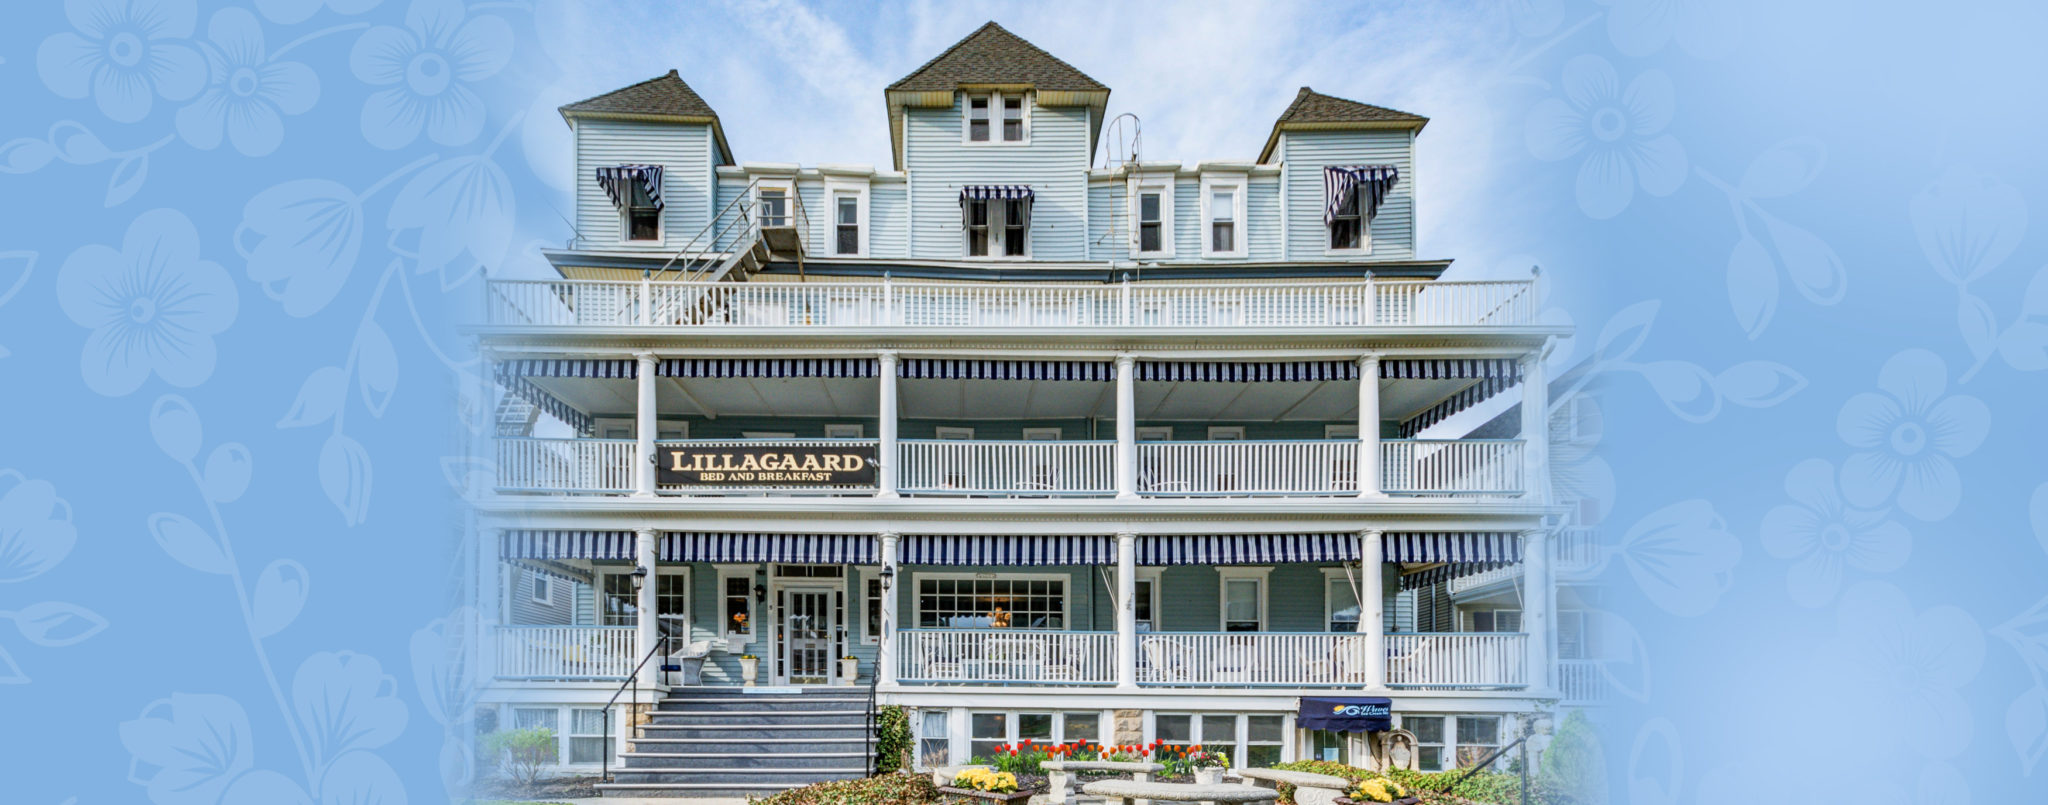 The Lillagaard Bed and Breakfast in Ocean Grove, NJ The